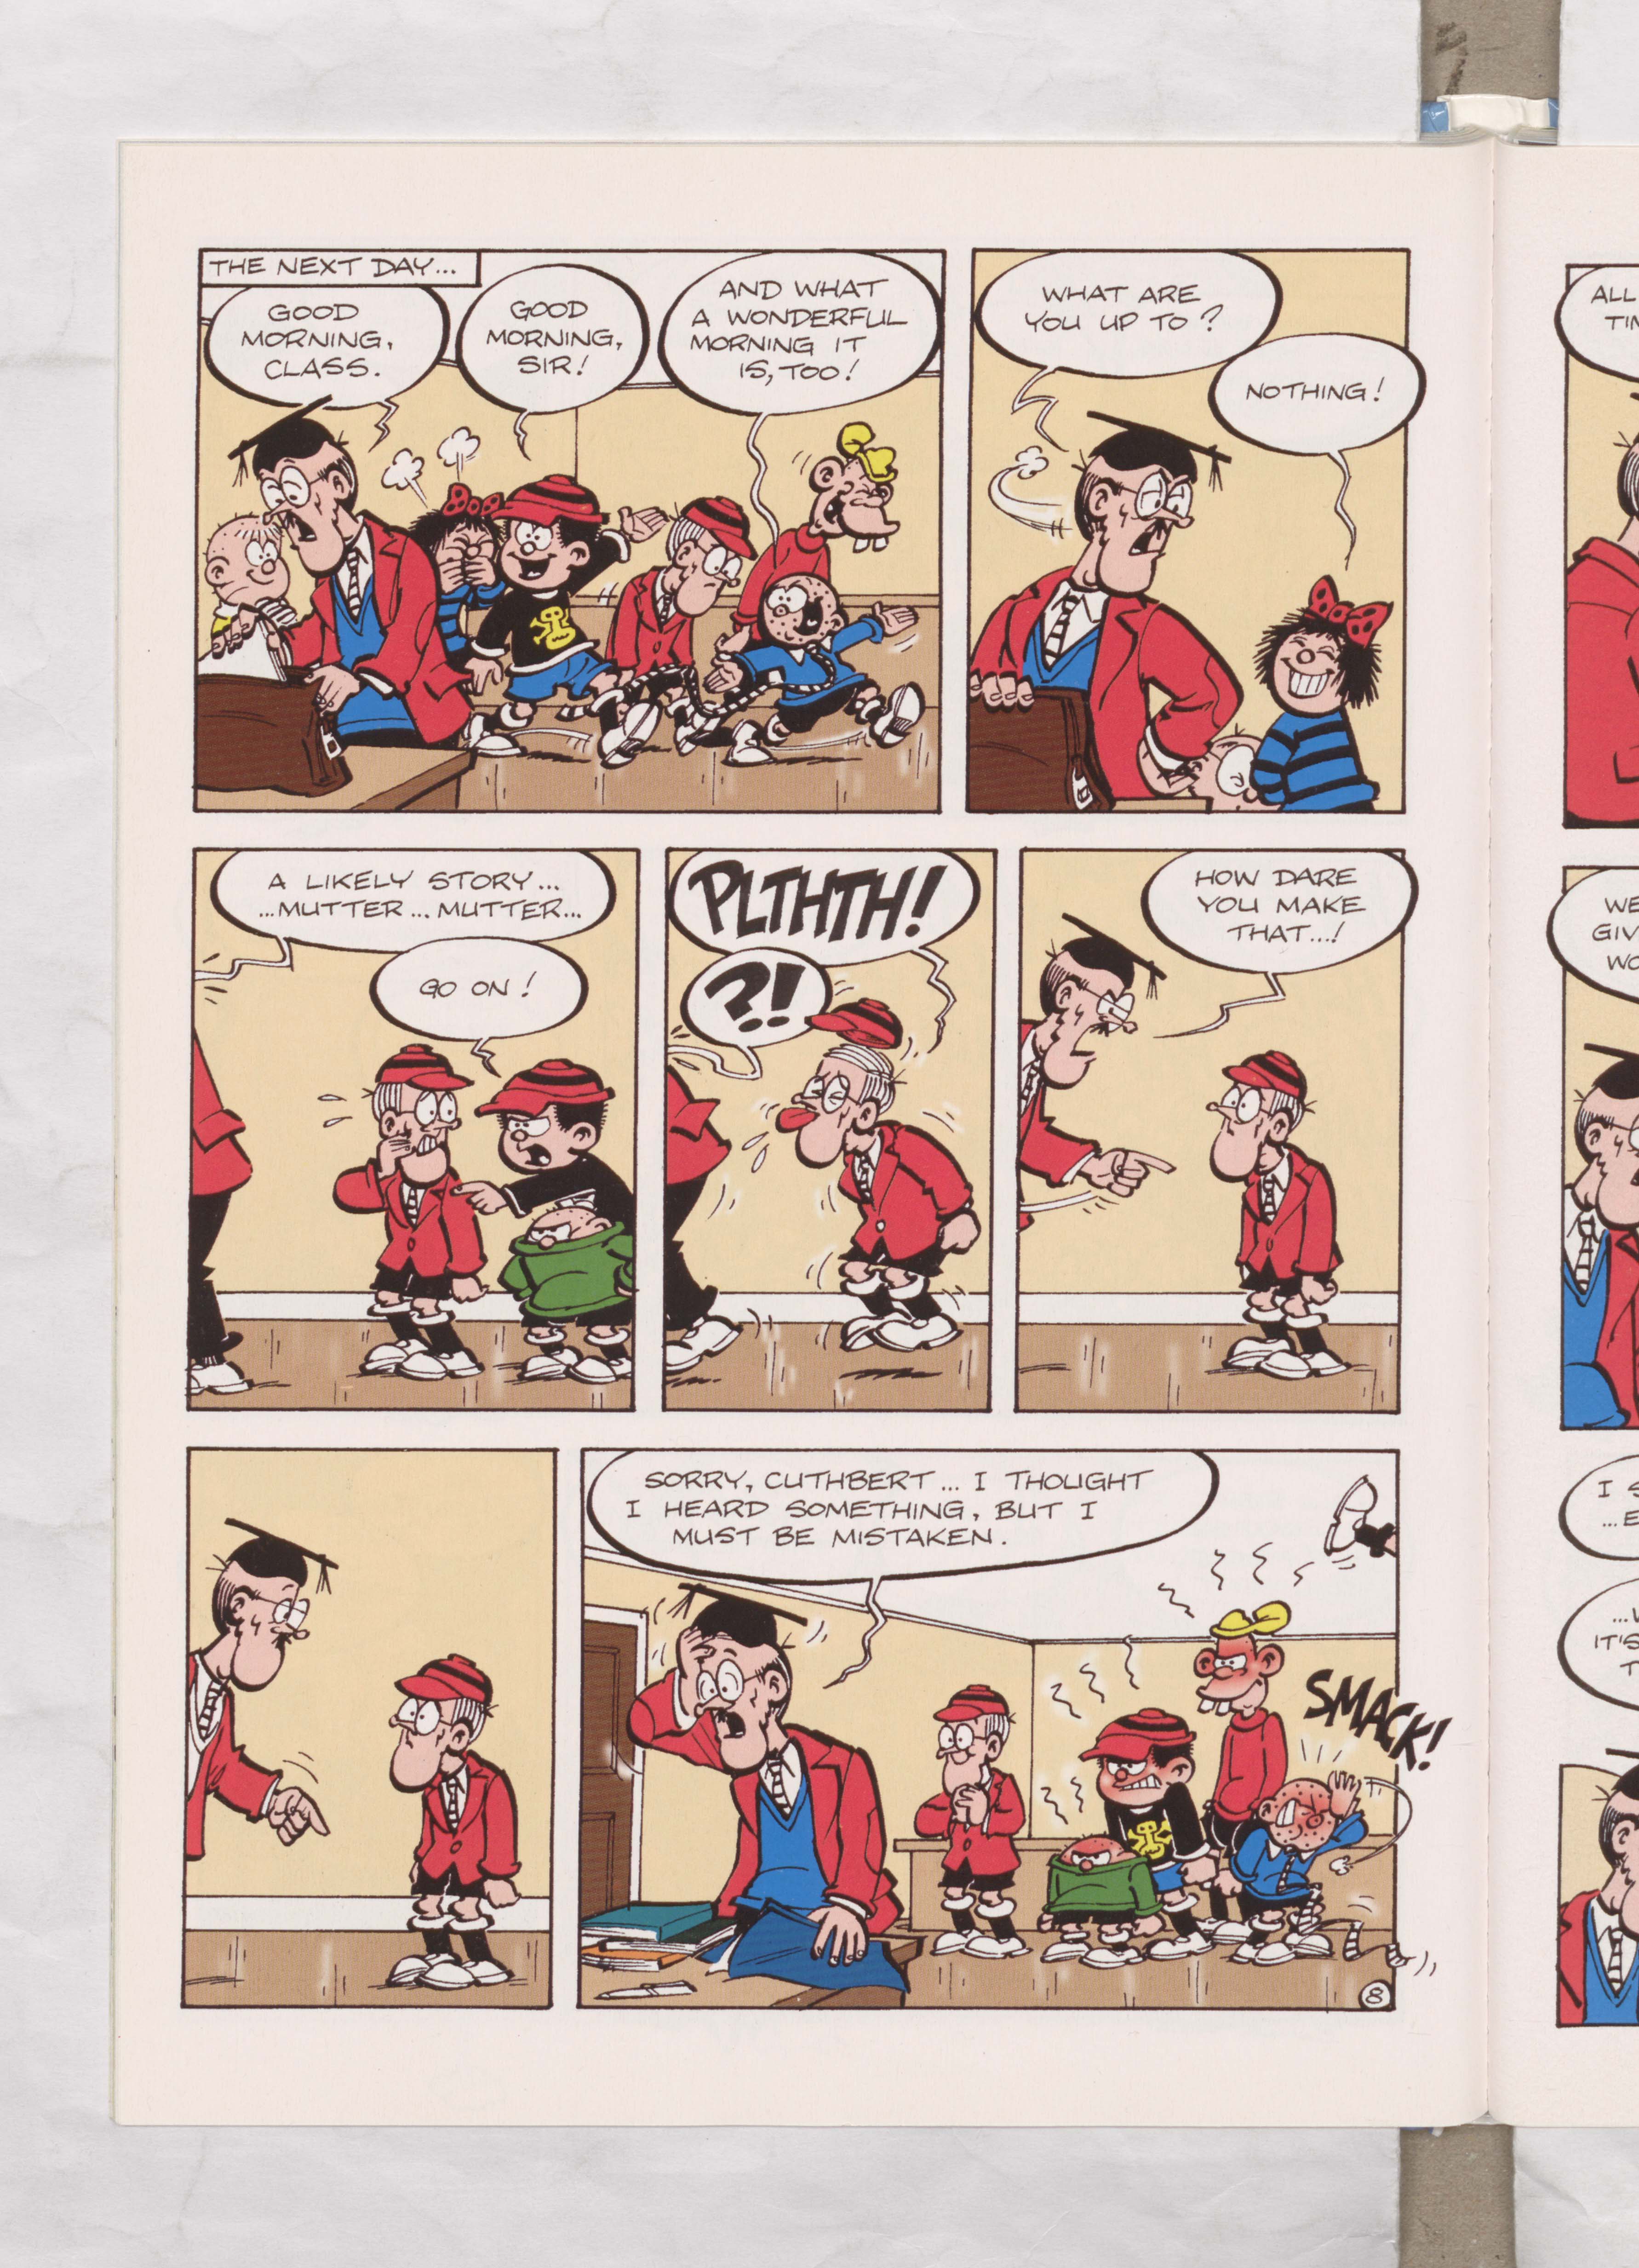 Bash Street Kids - Teachers Pest - Illustrated by Mike Pearse Beano Book 2004 Annual